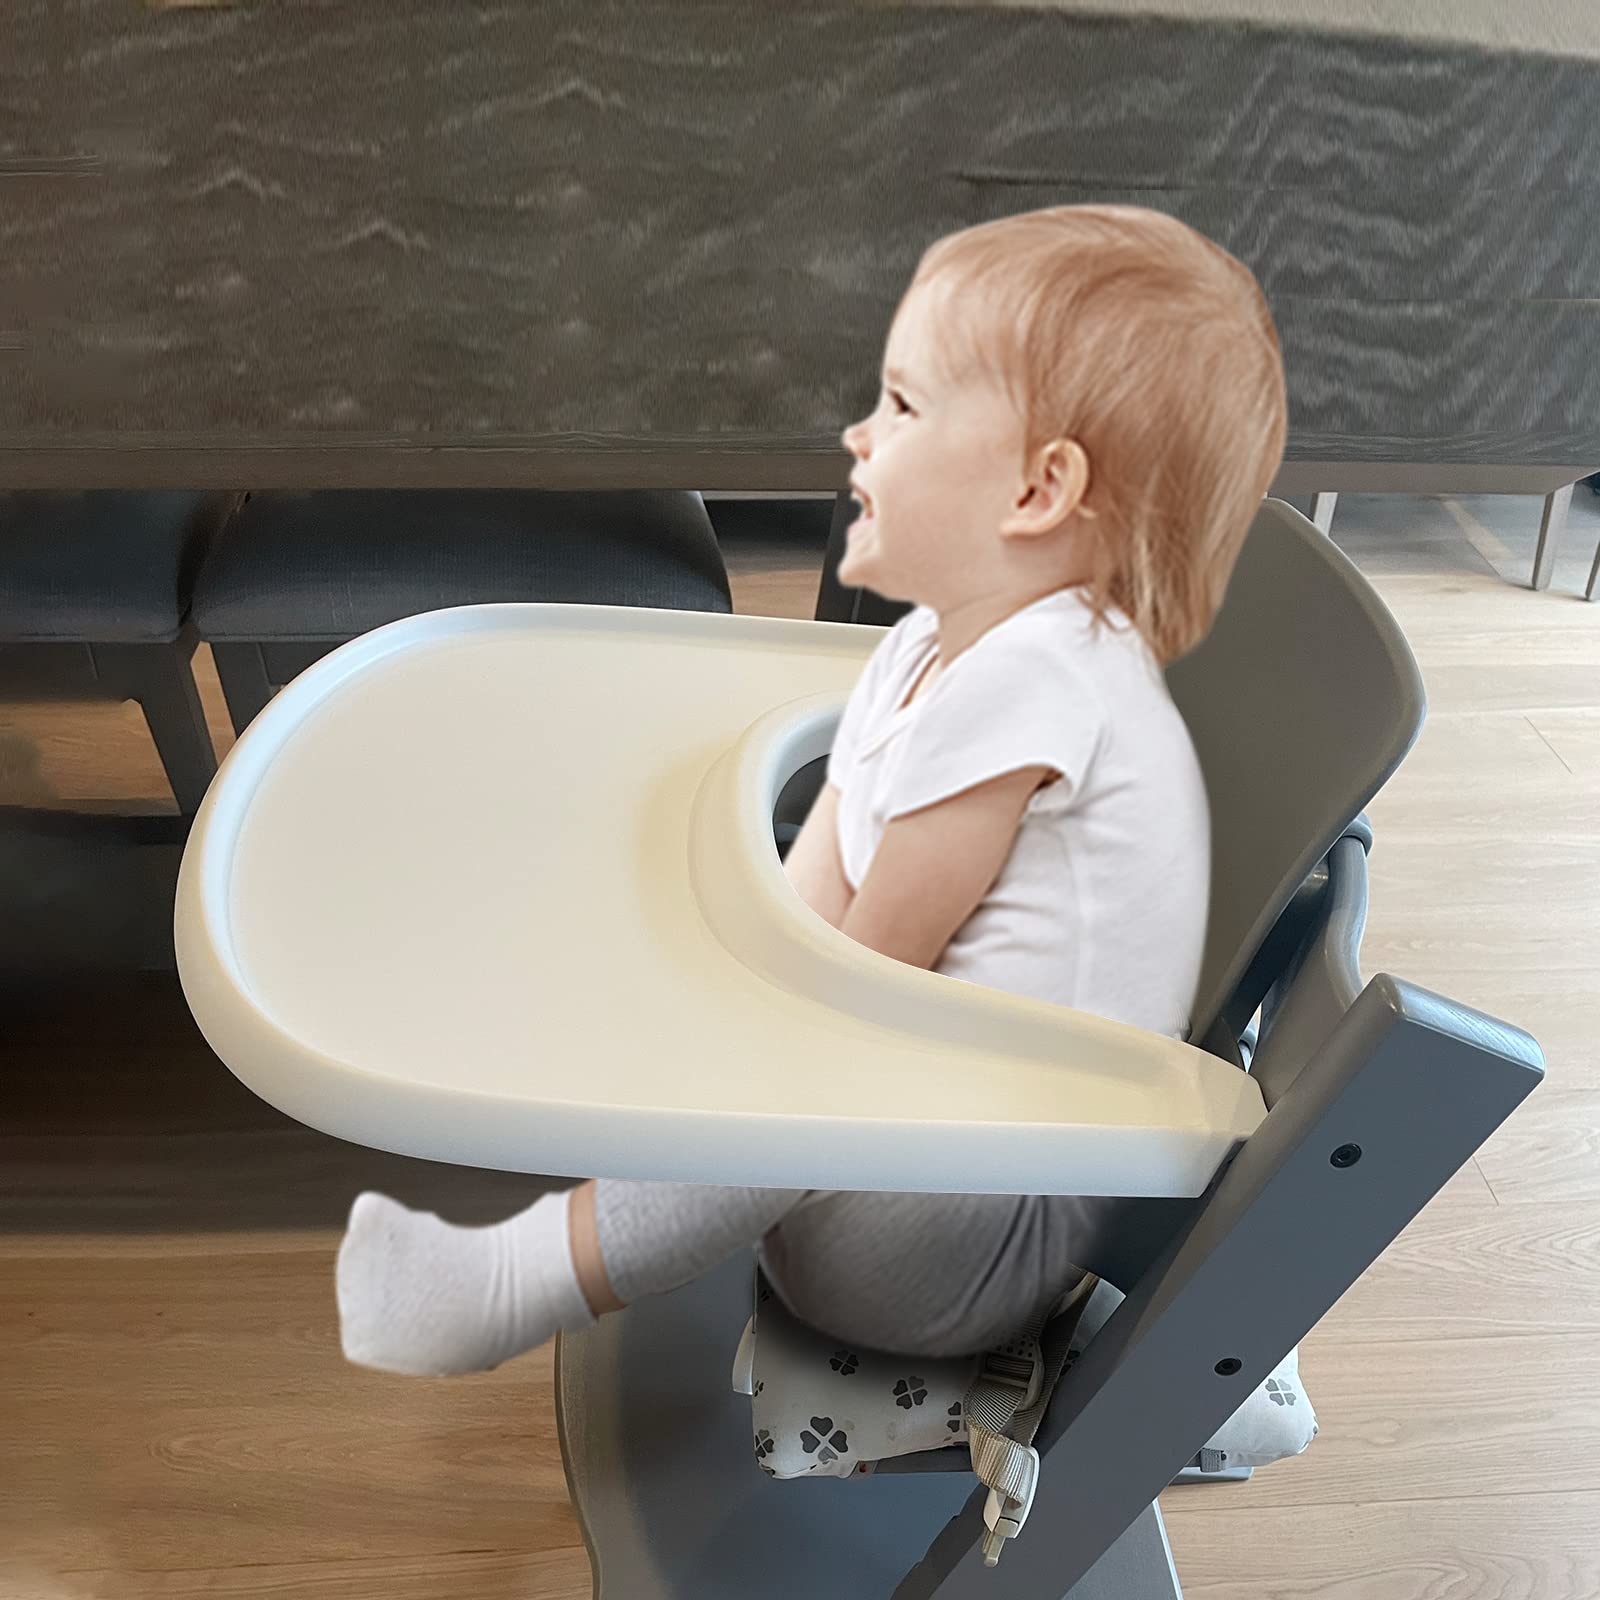 Baby High Chair Tray Compatible with Stokke Tripp Trapp Chair, with Smooth Surface Provides Suction Plates with More Suction Power